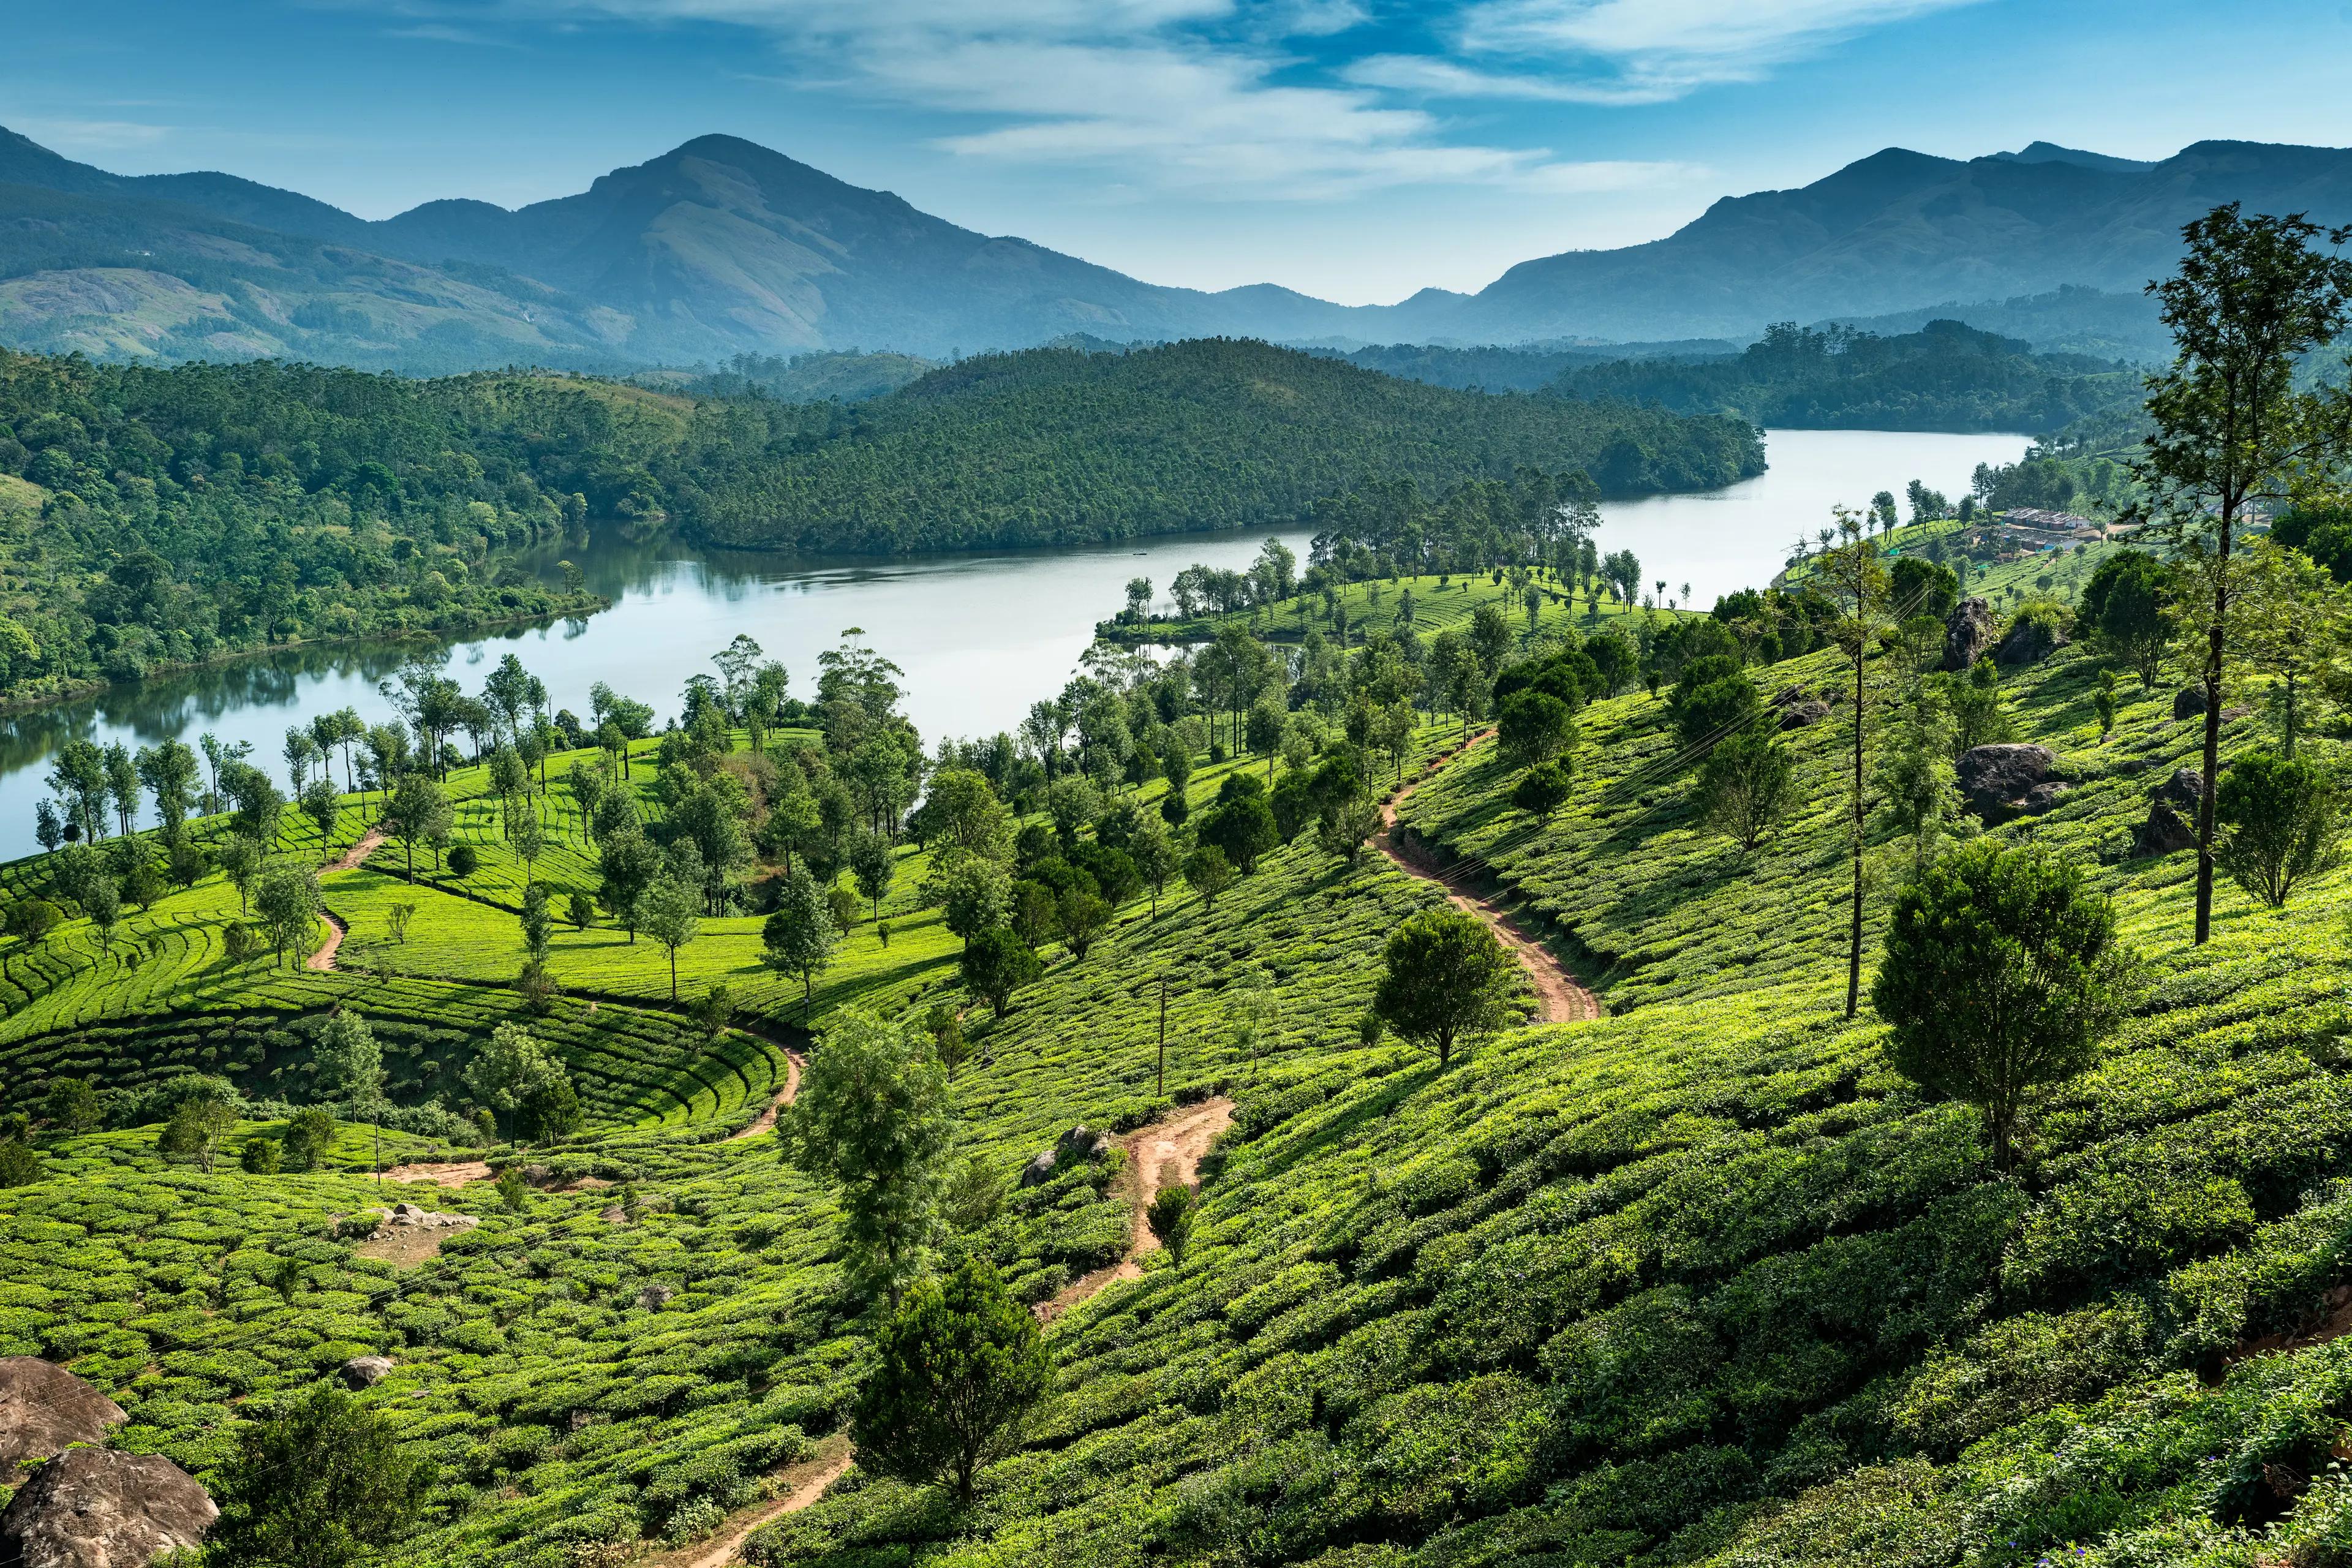 6-Day Kerala Adventure: Sightseeing, Outdoors and Relaxation